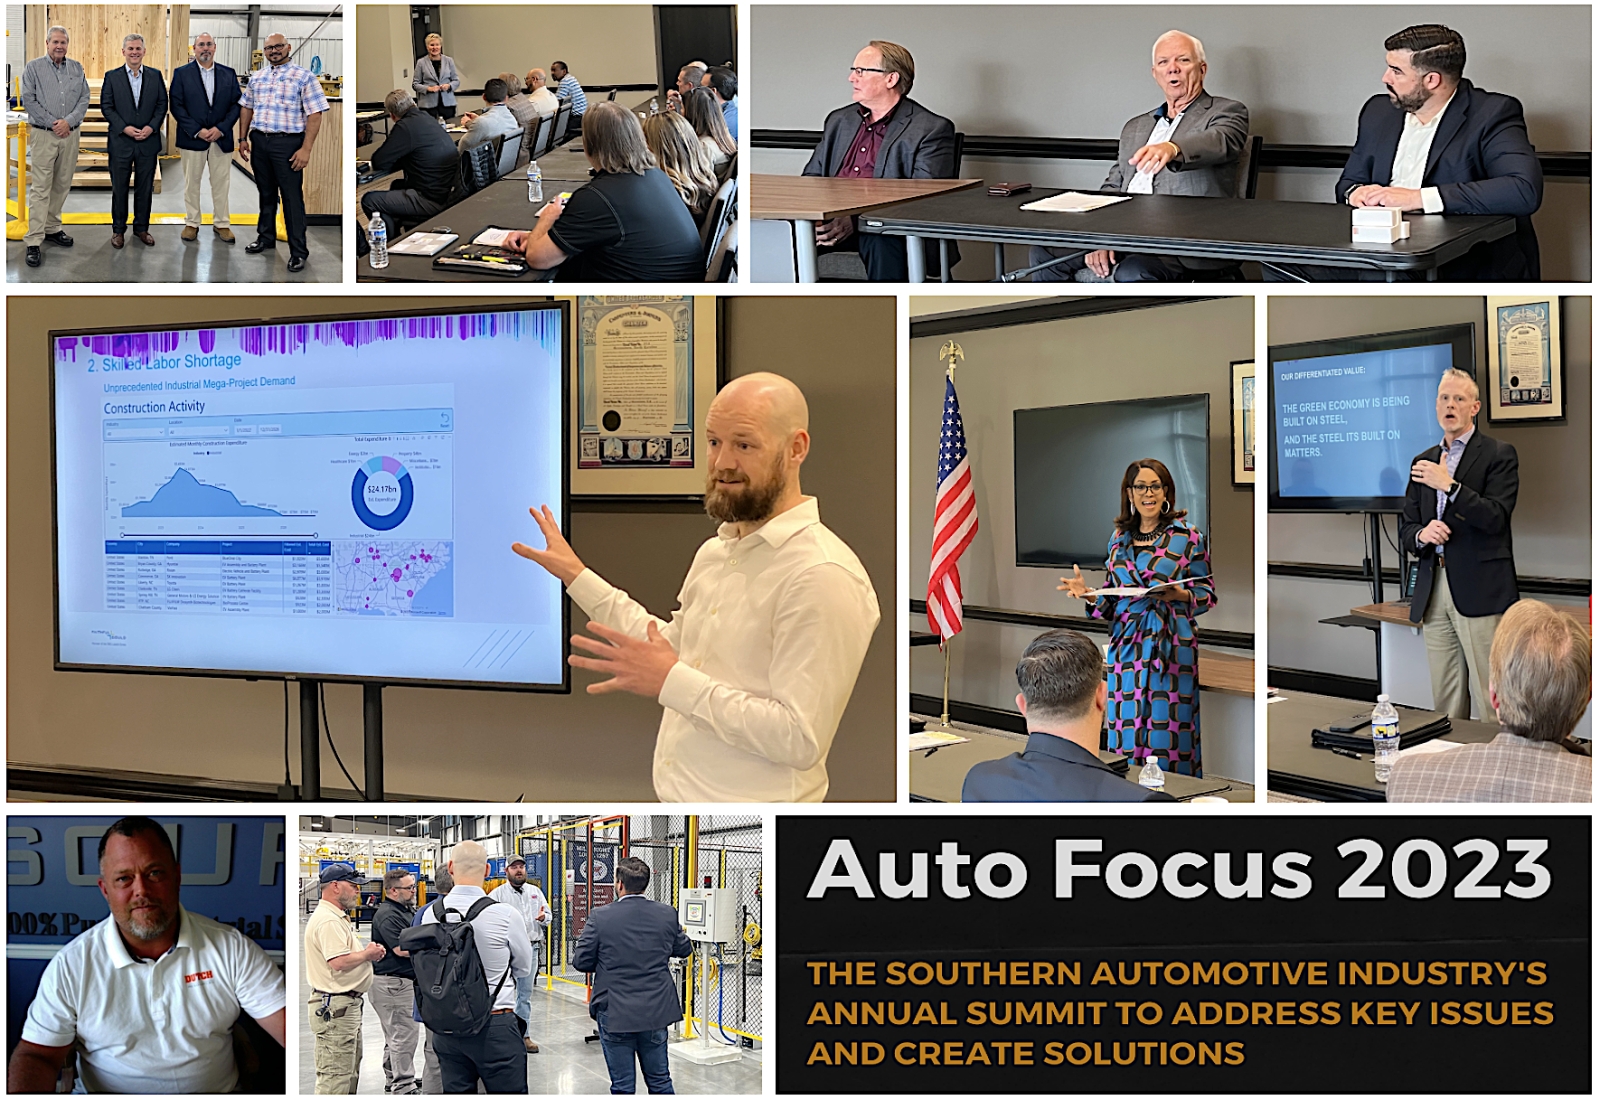 Auto Focus 2023 Attracts Diverse Group of Industry Leaders for Two Days of Collaboration